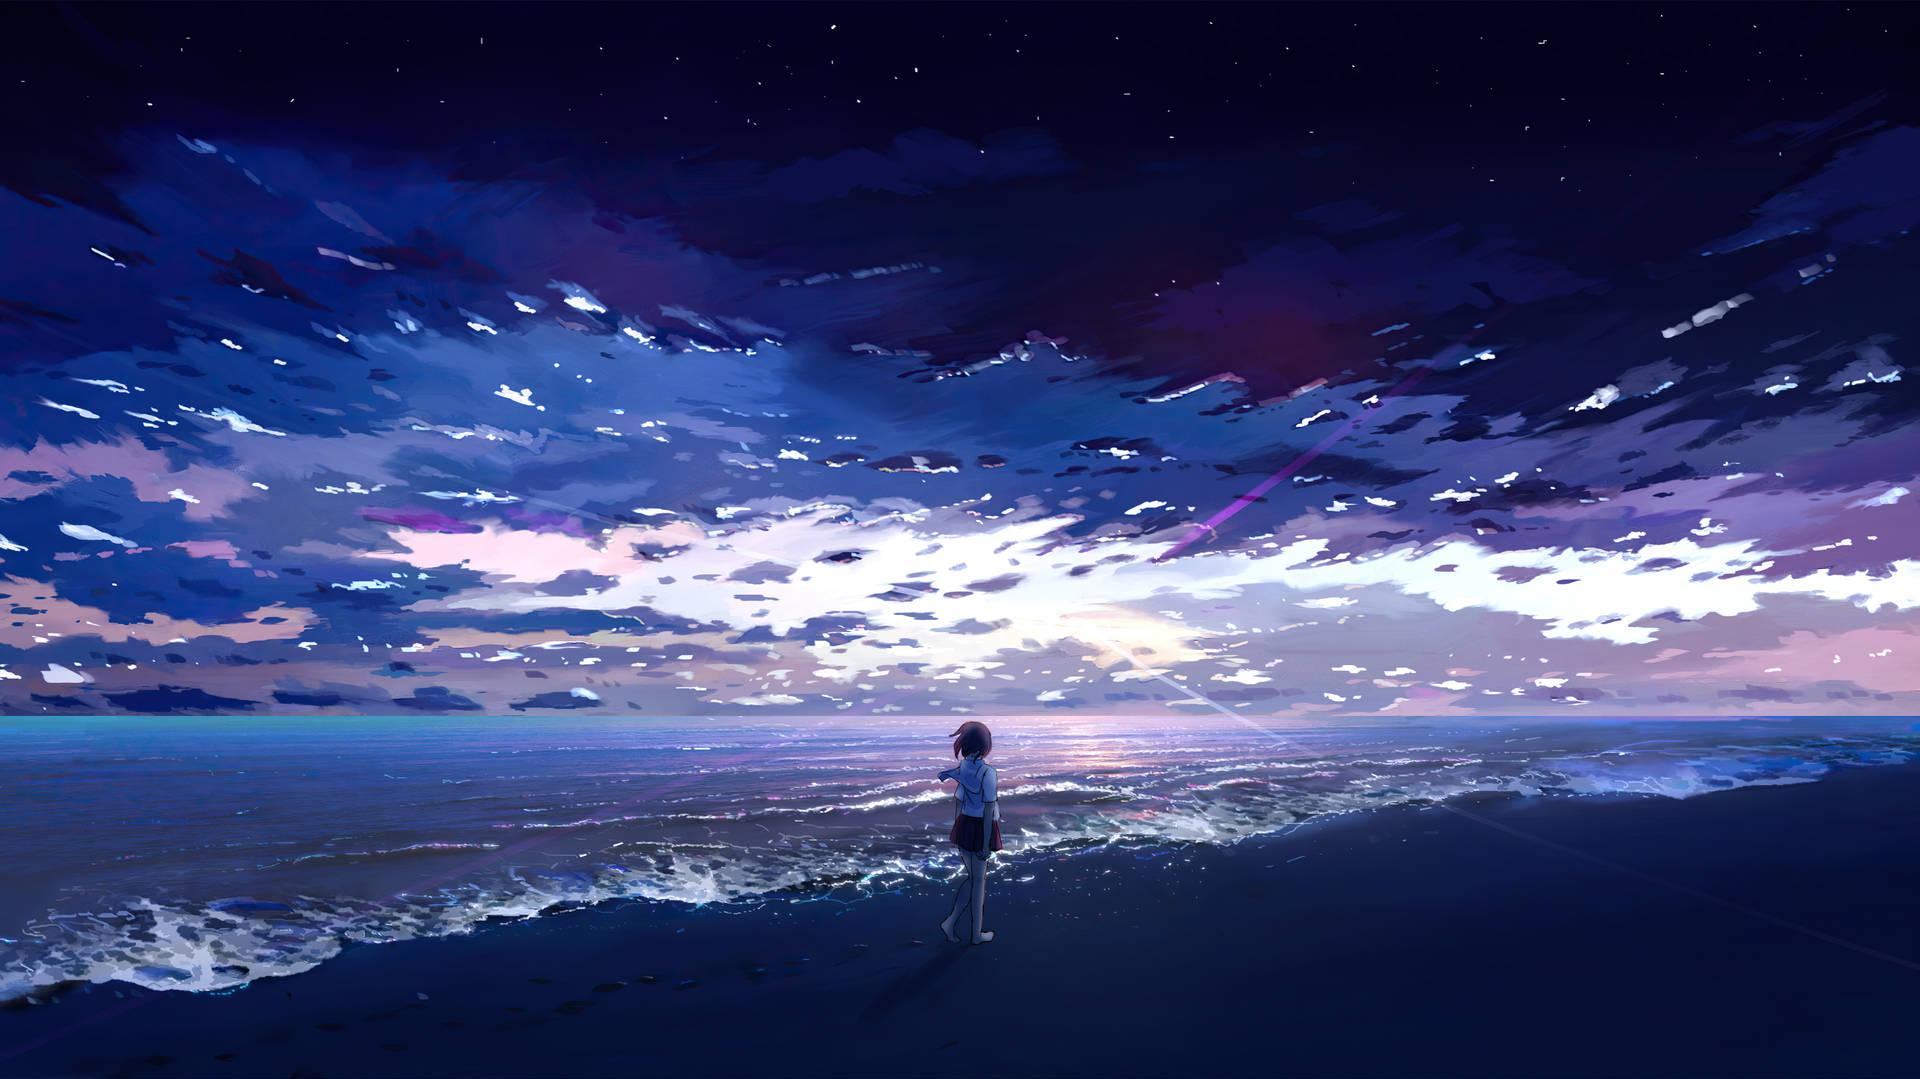 Anime Girl And Sea Background Wallpaper